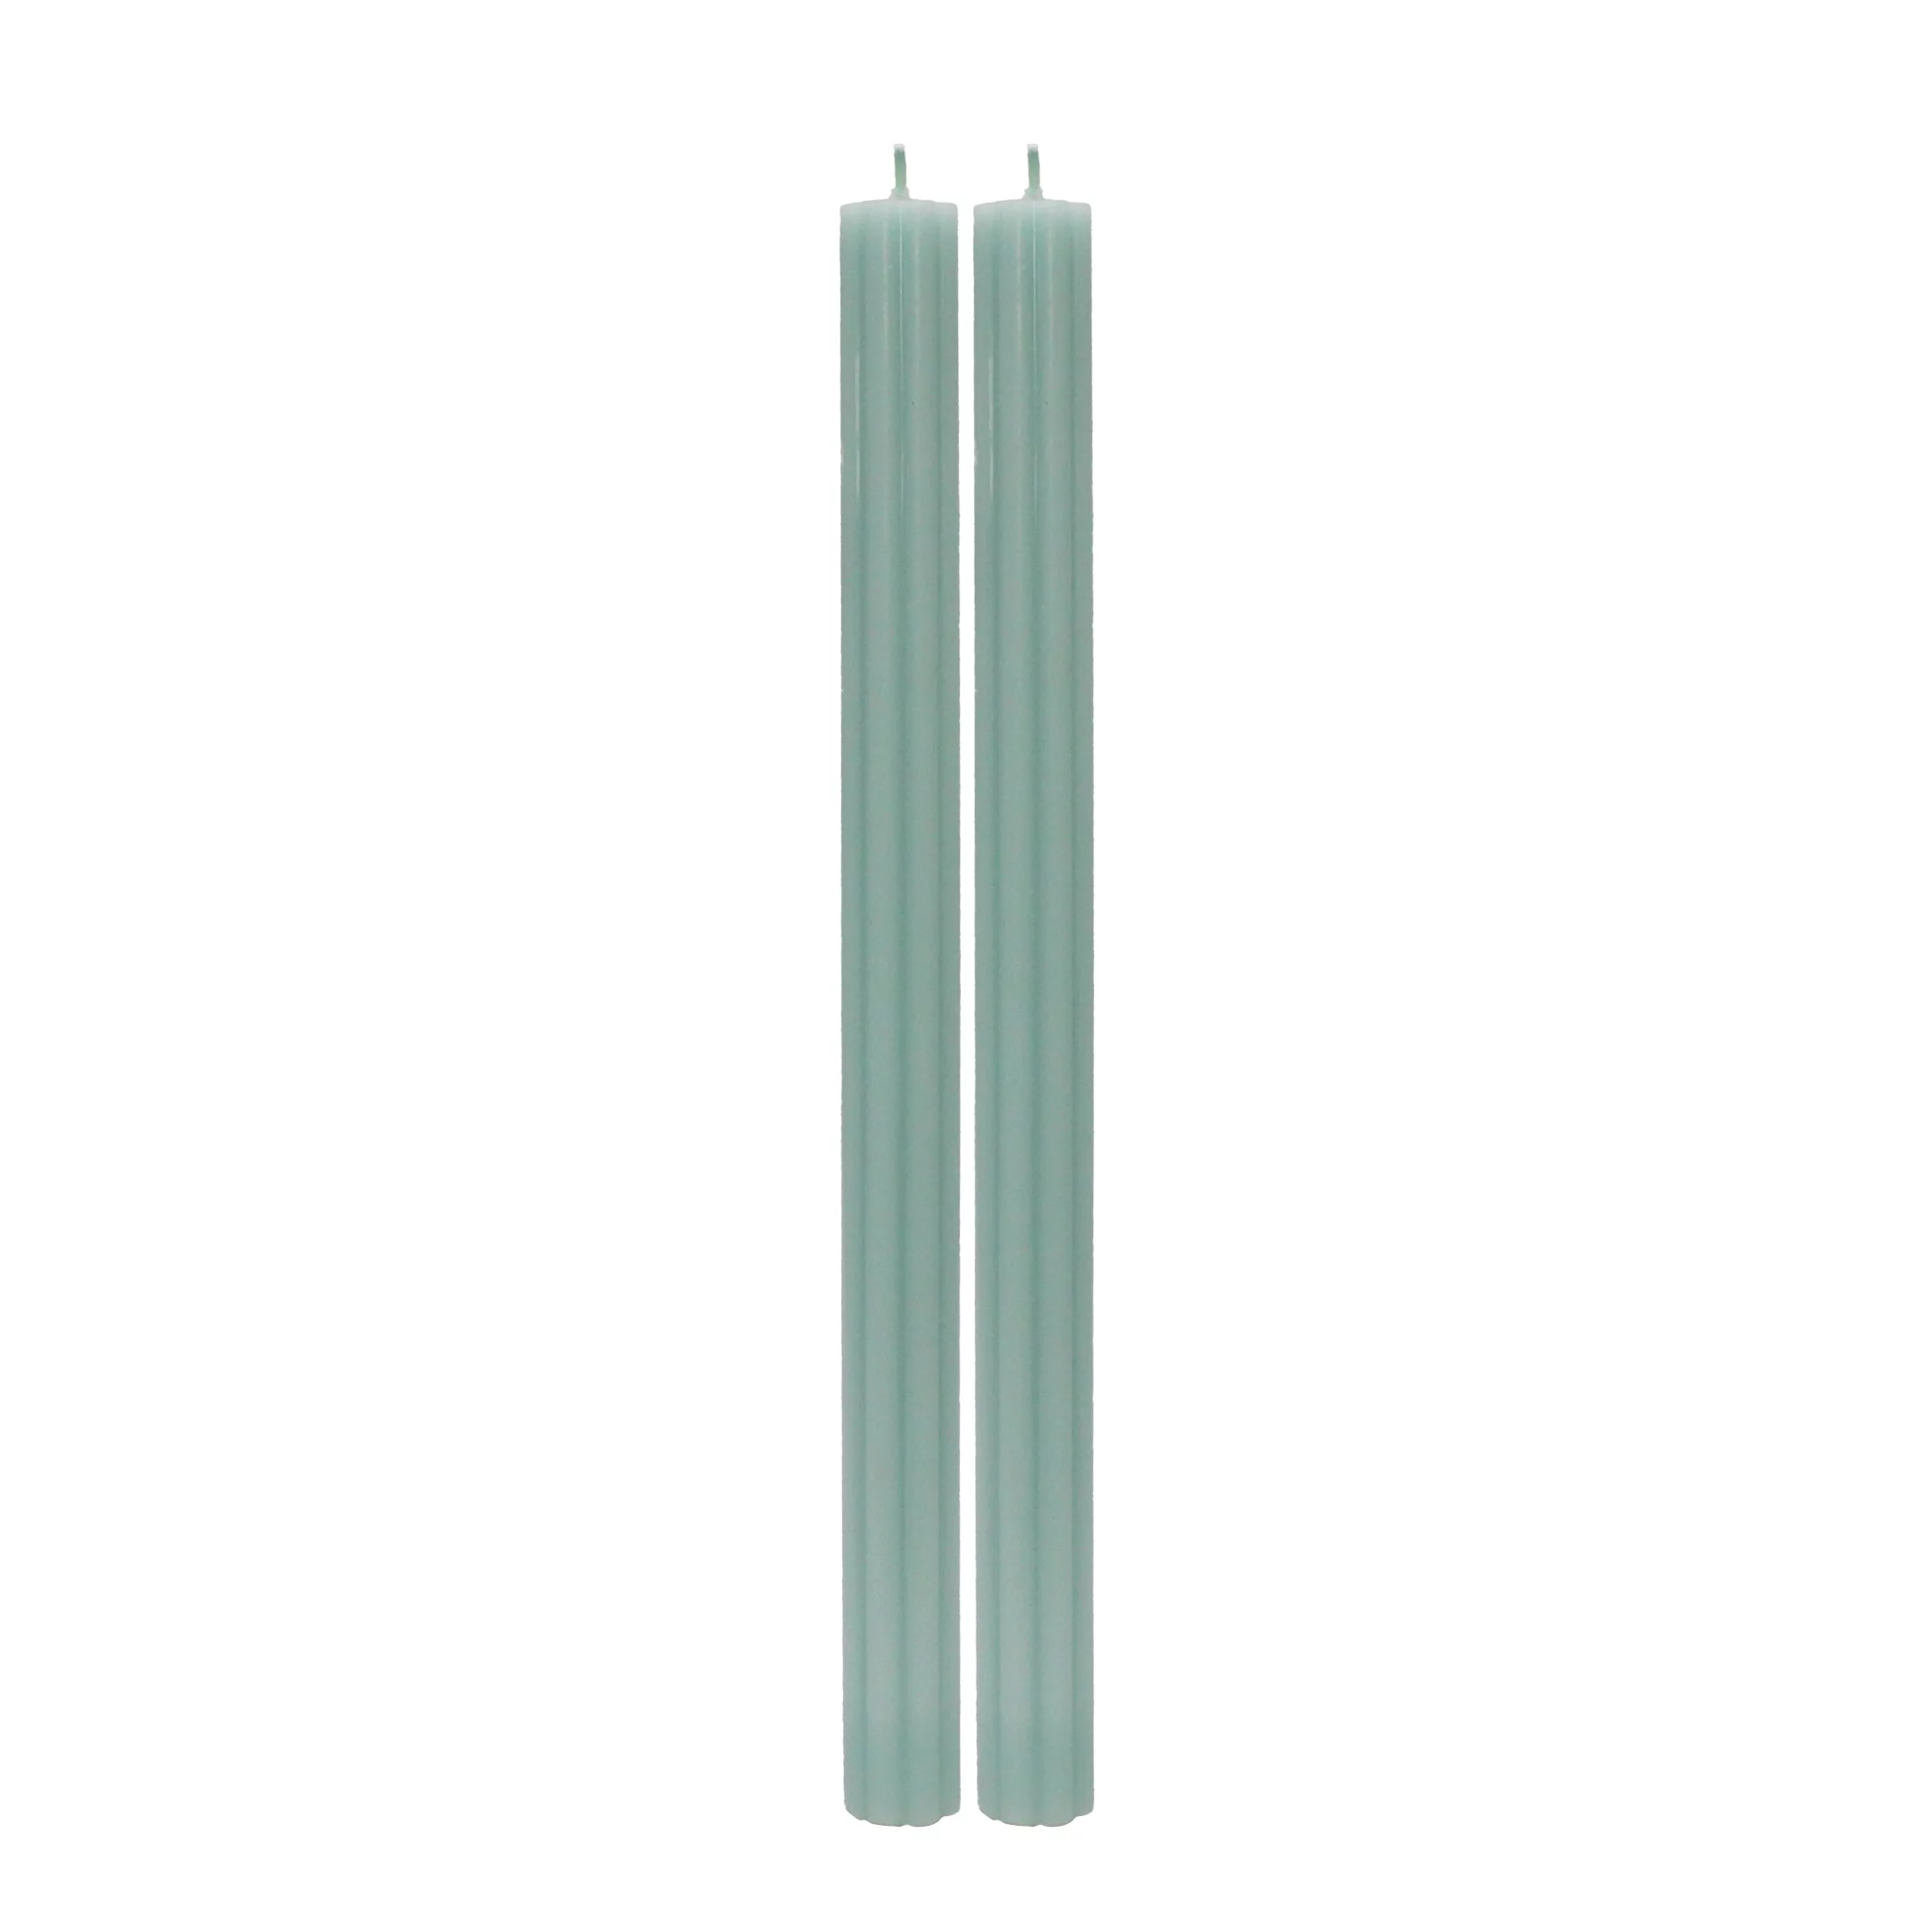 Better Homes & Gardens Unscented Taper Candles, Green, 2-Pack, 11 inches Height